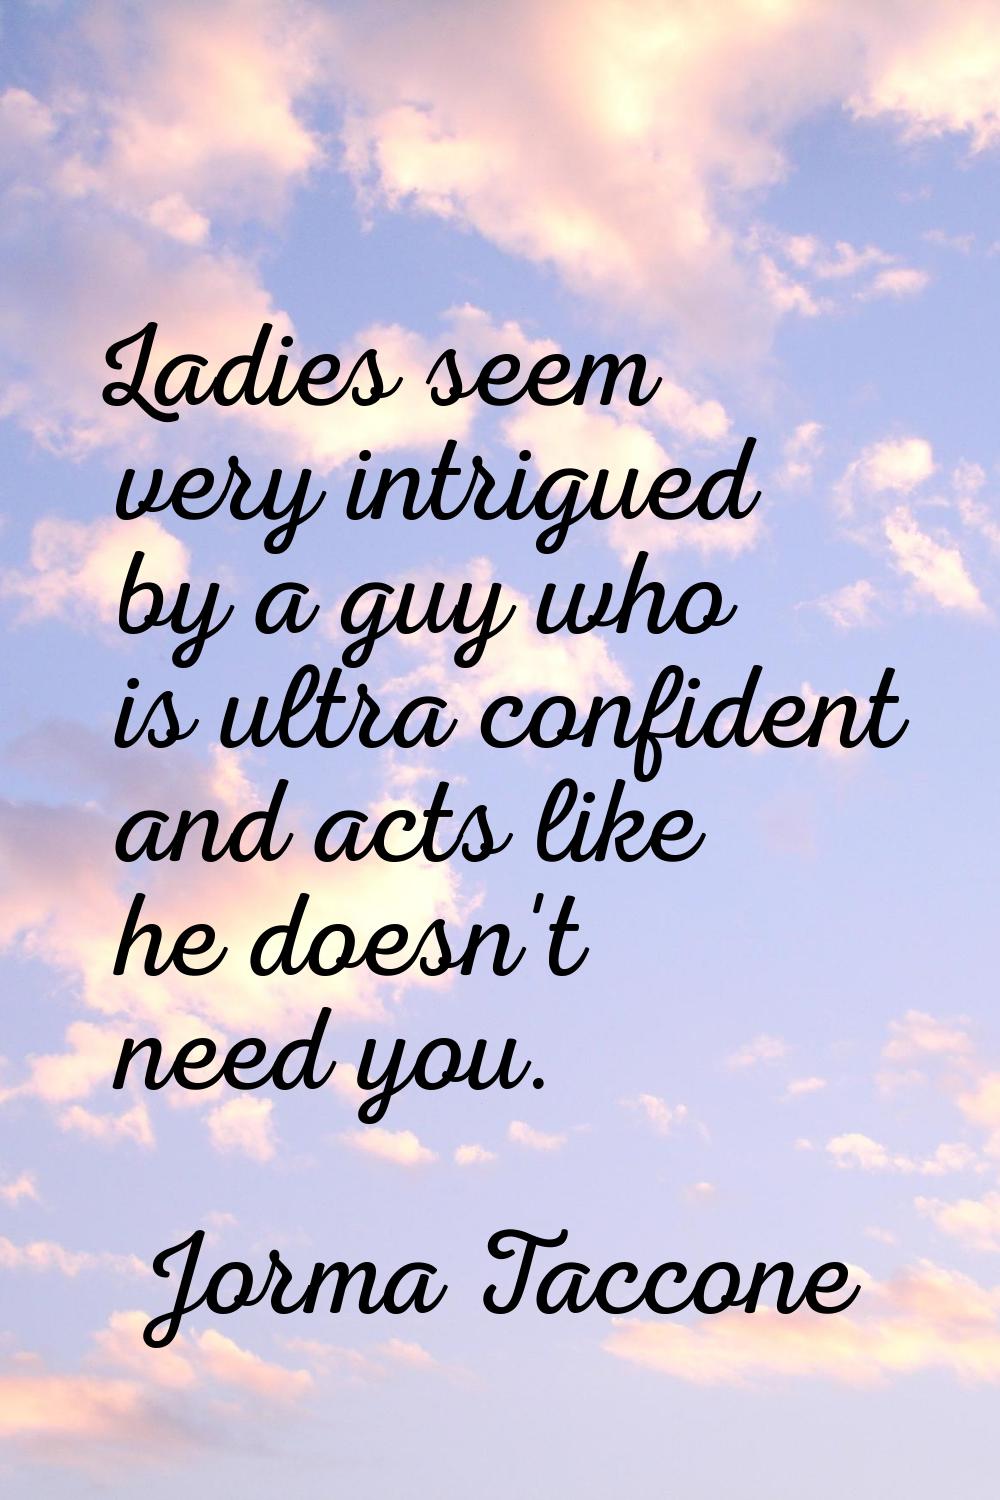 Ladies seem very intrigued by a guy who is ultra confident and acts like he doesn't need you.